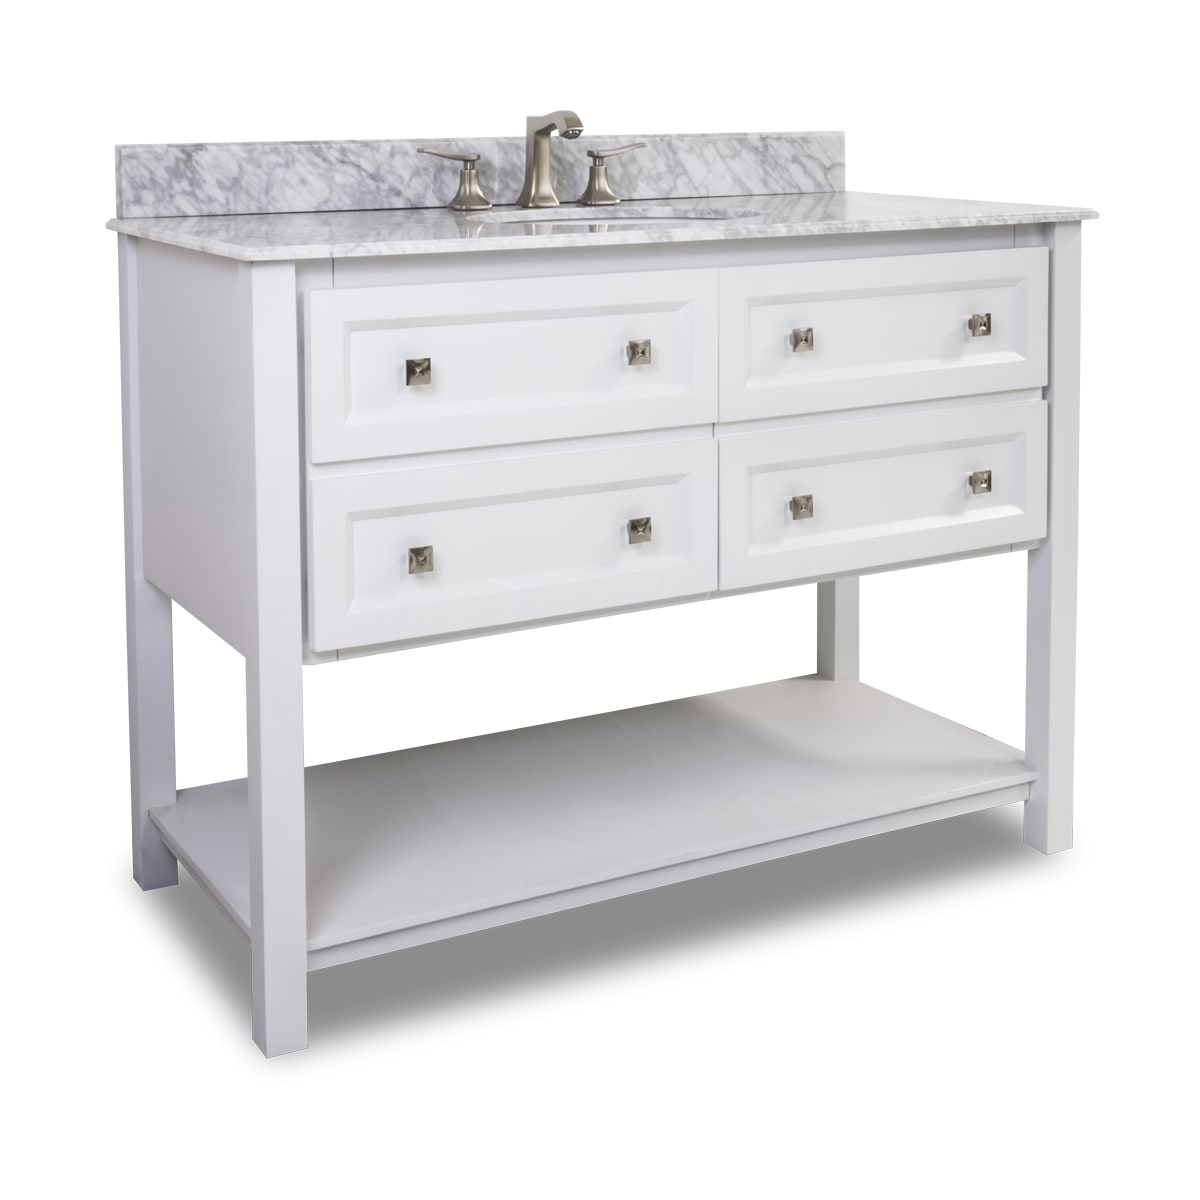 Elements Van066 48 T Mw Painted White Adler Collection 48 Inch